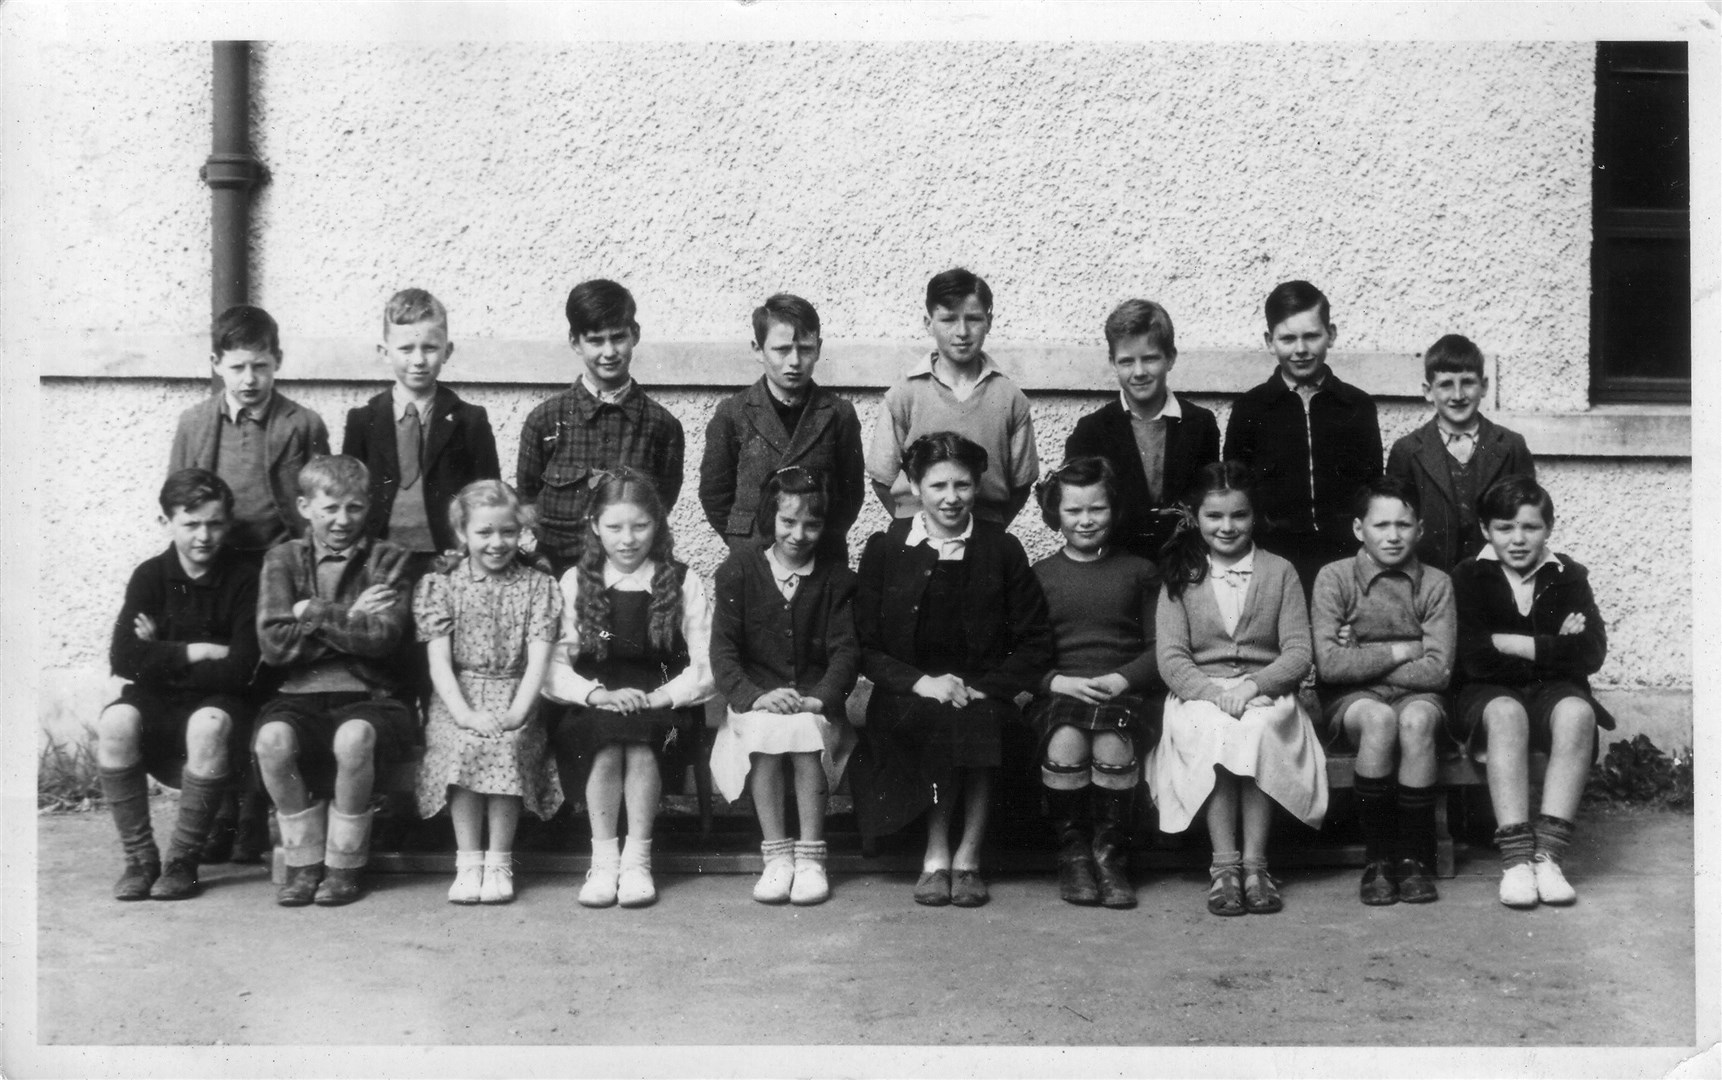 Primary Pupils Room 7, 2B and 3B. Late 1940s. Picture courtesy of Dingwall Museum